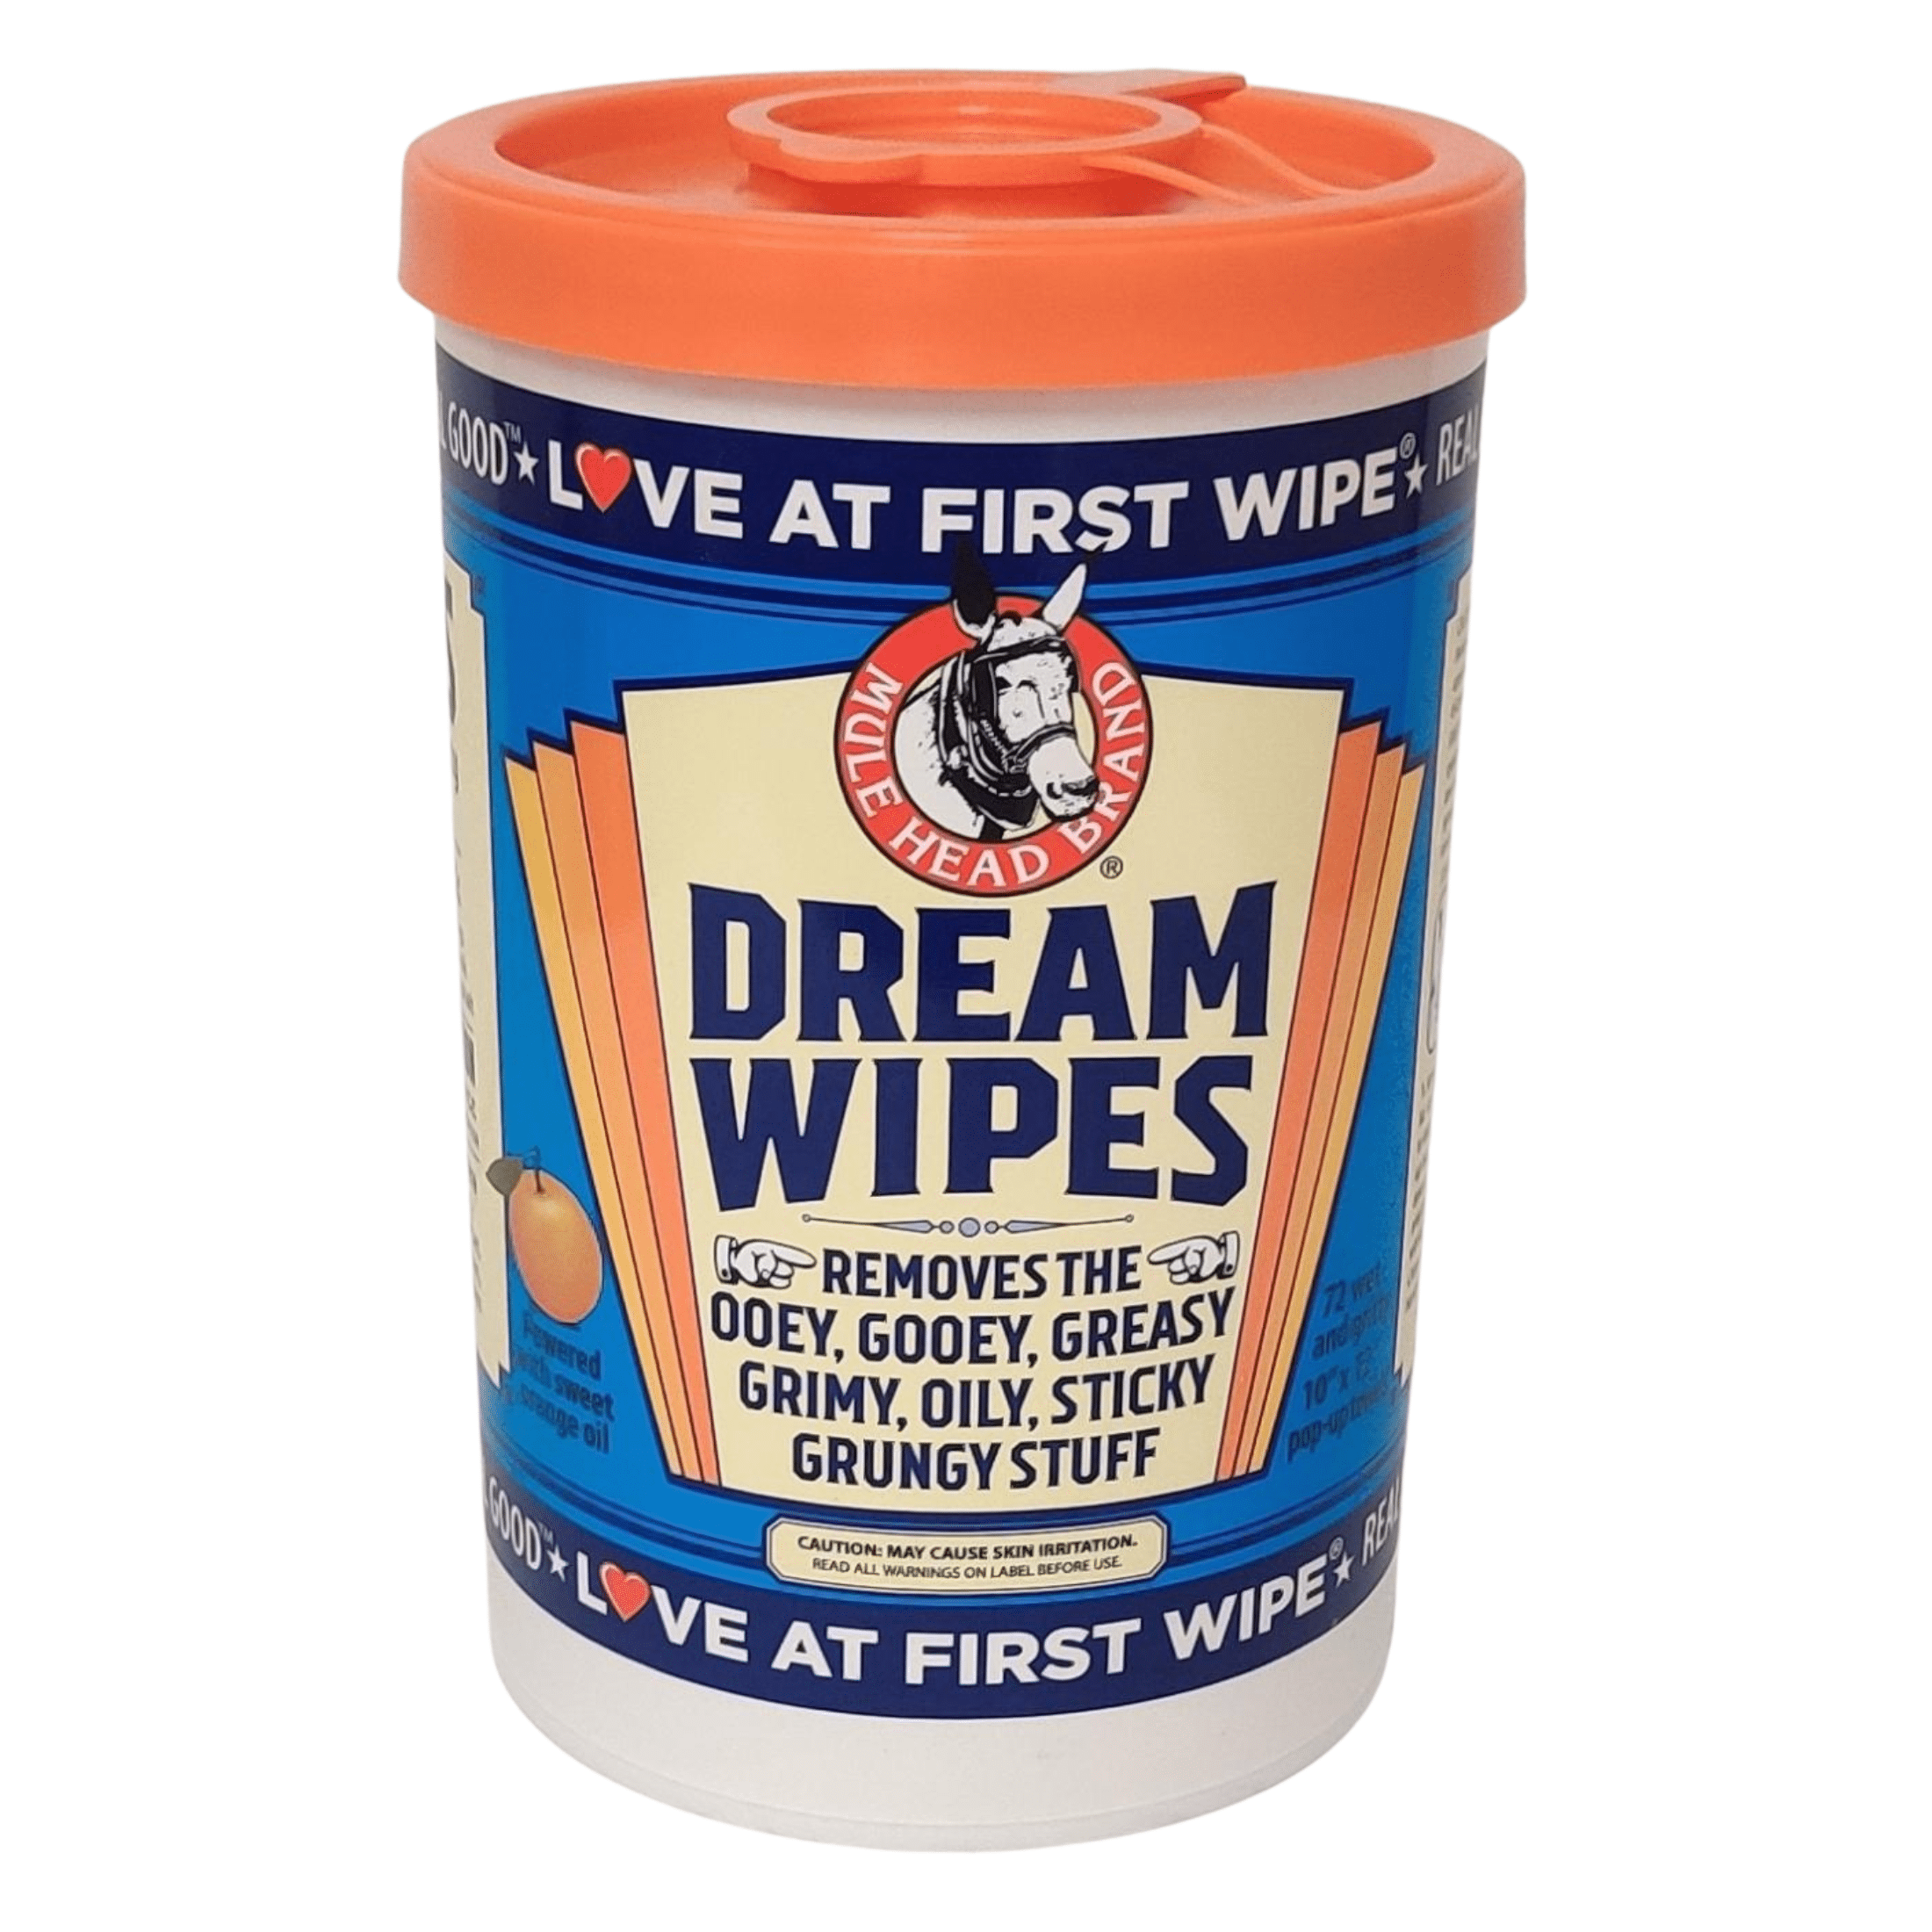 Mule Head Brand Dream Wipes Heavy Duty Citrus Based Cleaning Wipe, 72 Count